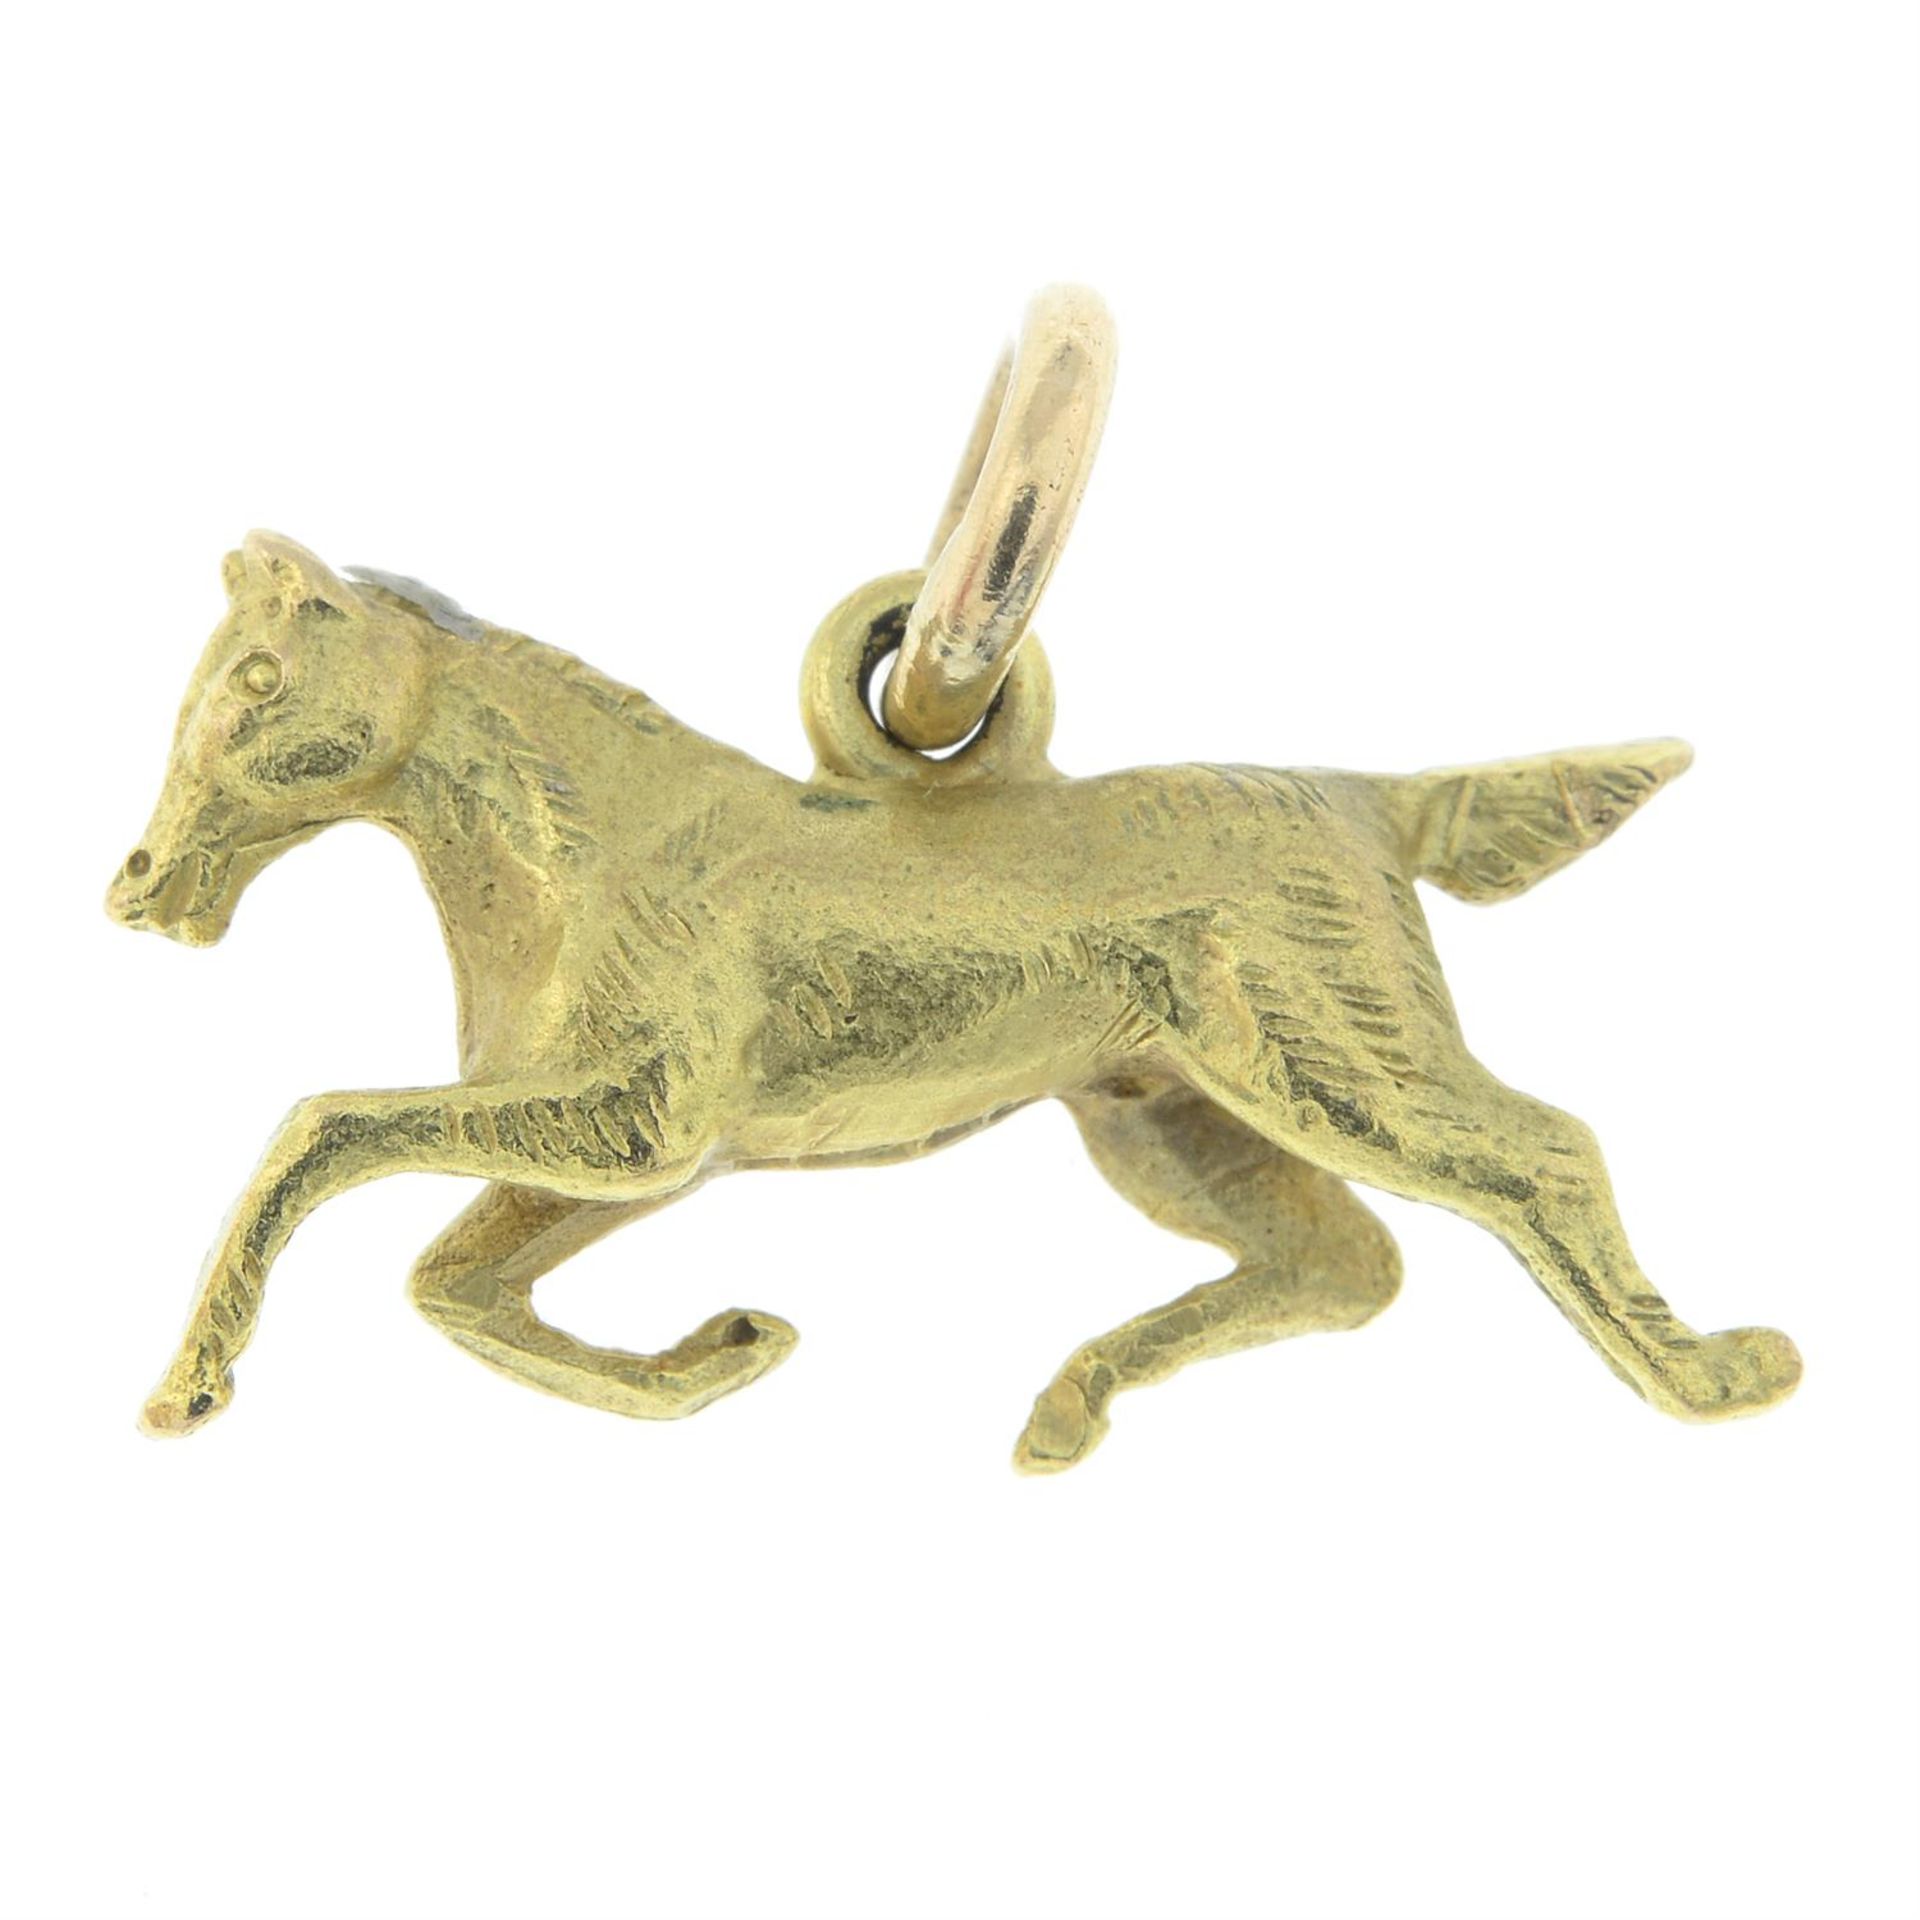 An early 20th century 9ct gold running horse pendant/charm. - Image 2 of 2